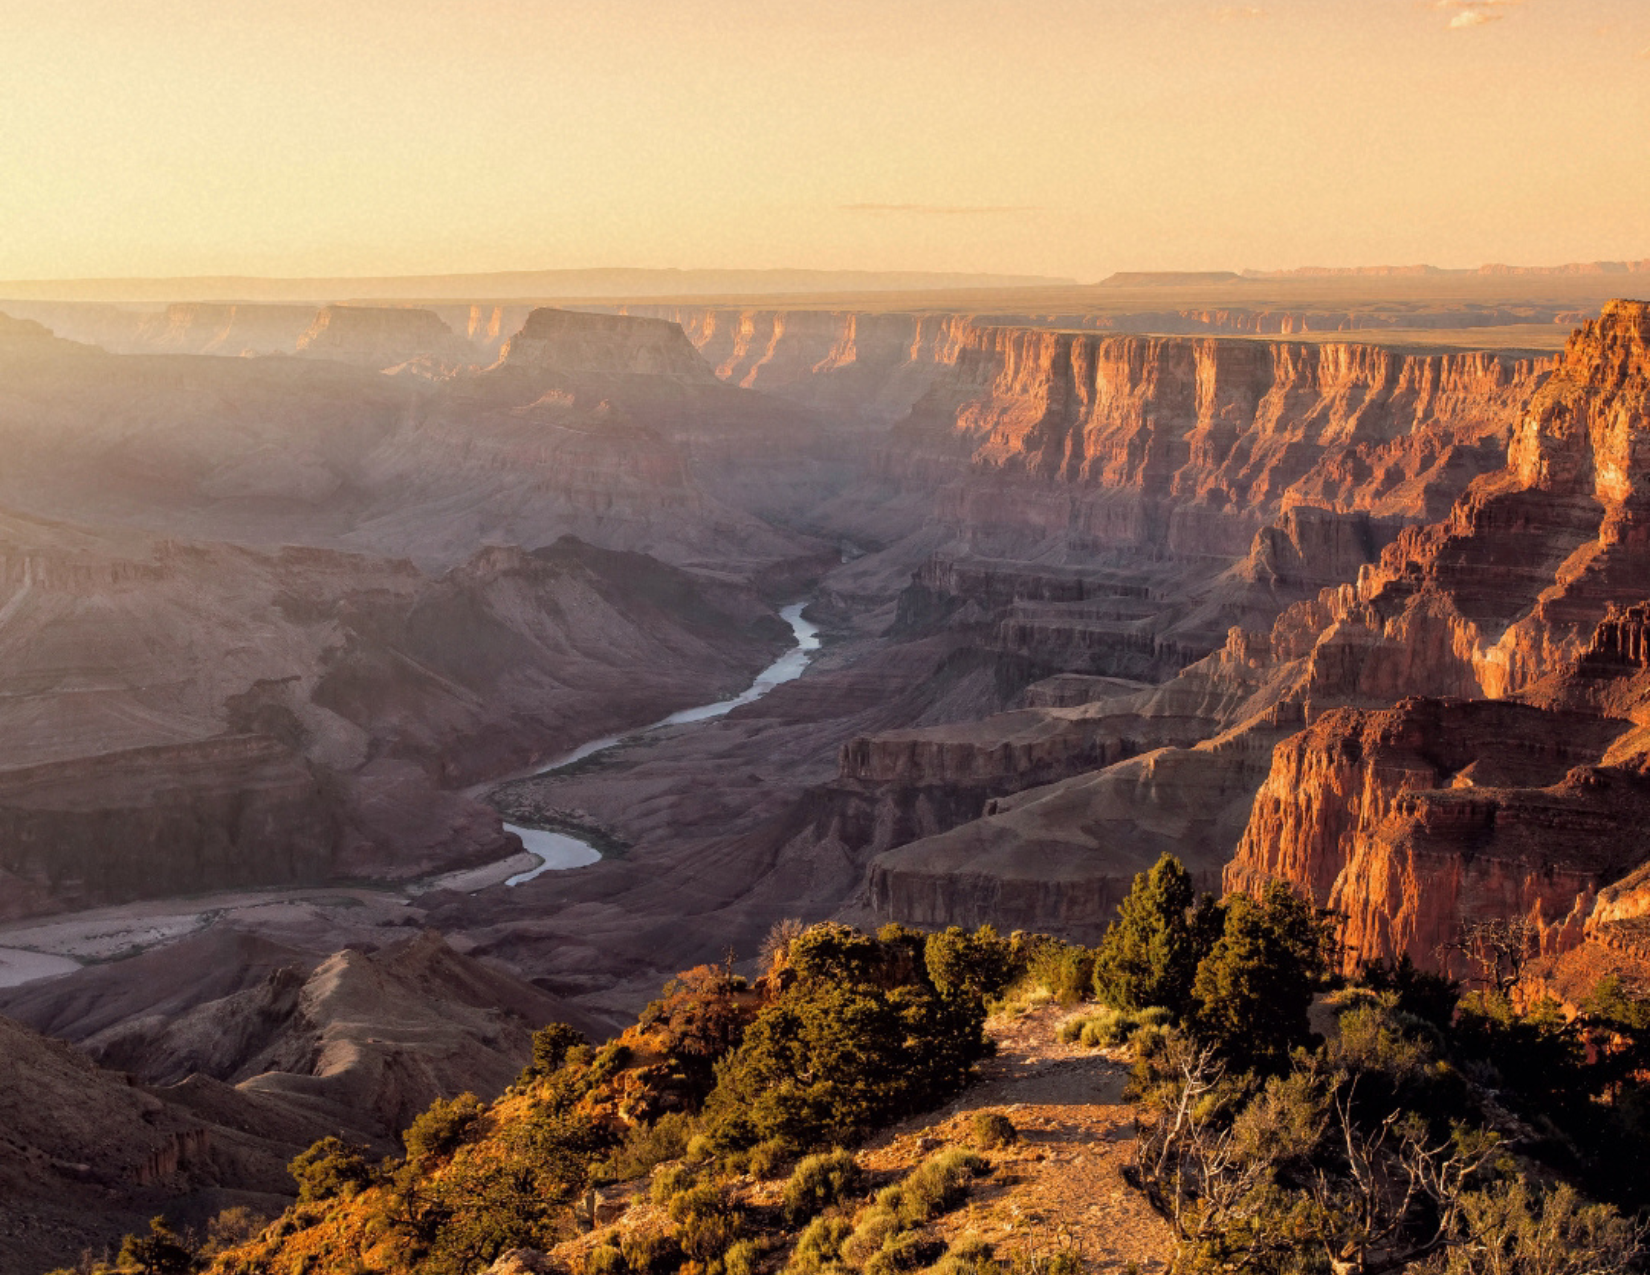 A light orange and hazy sunset at the South Rim of the Grand Canyon in Arizona